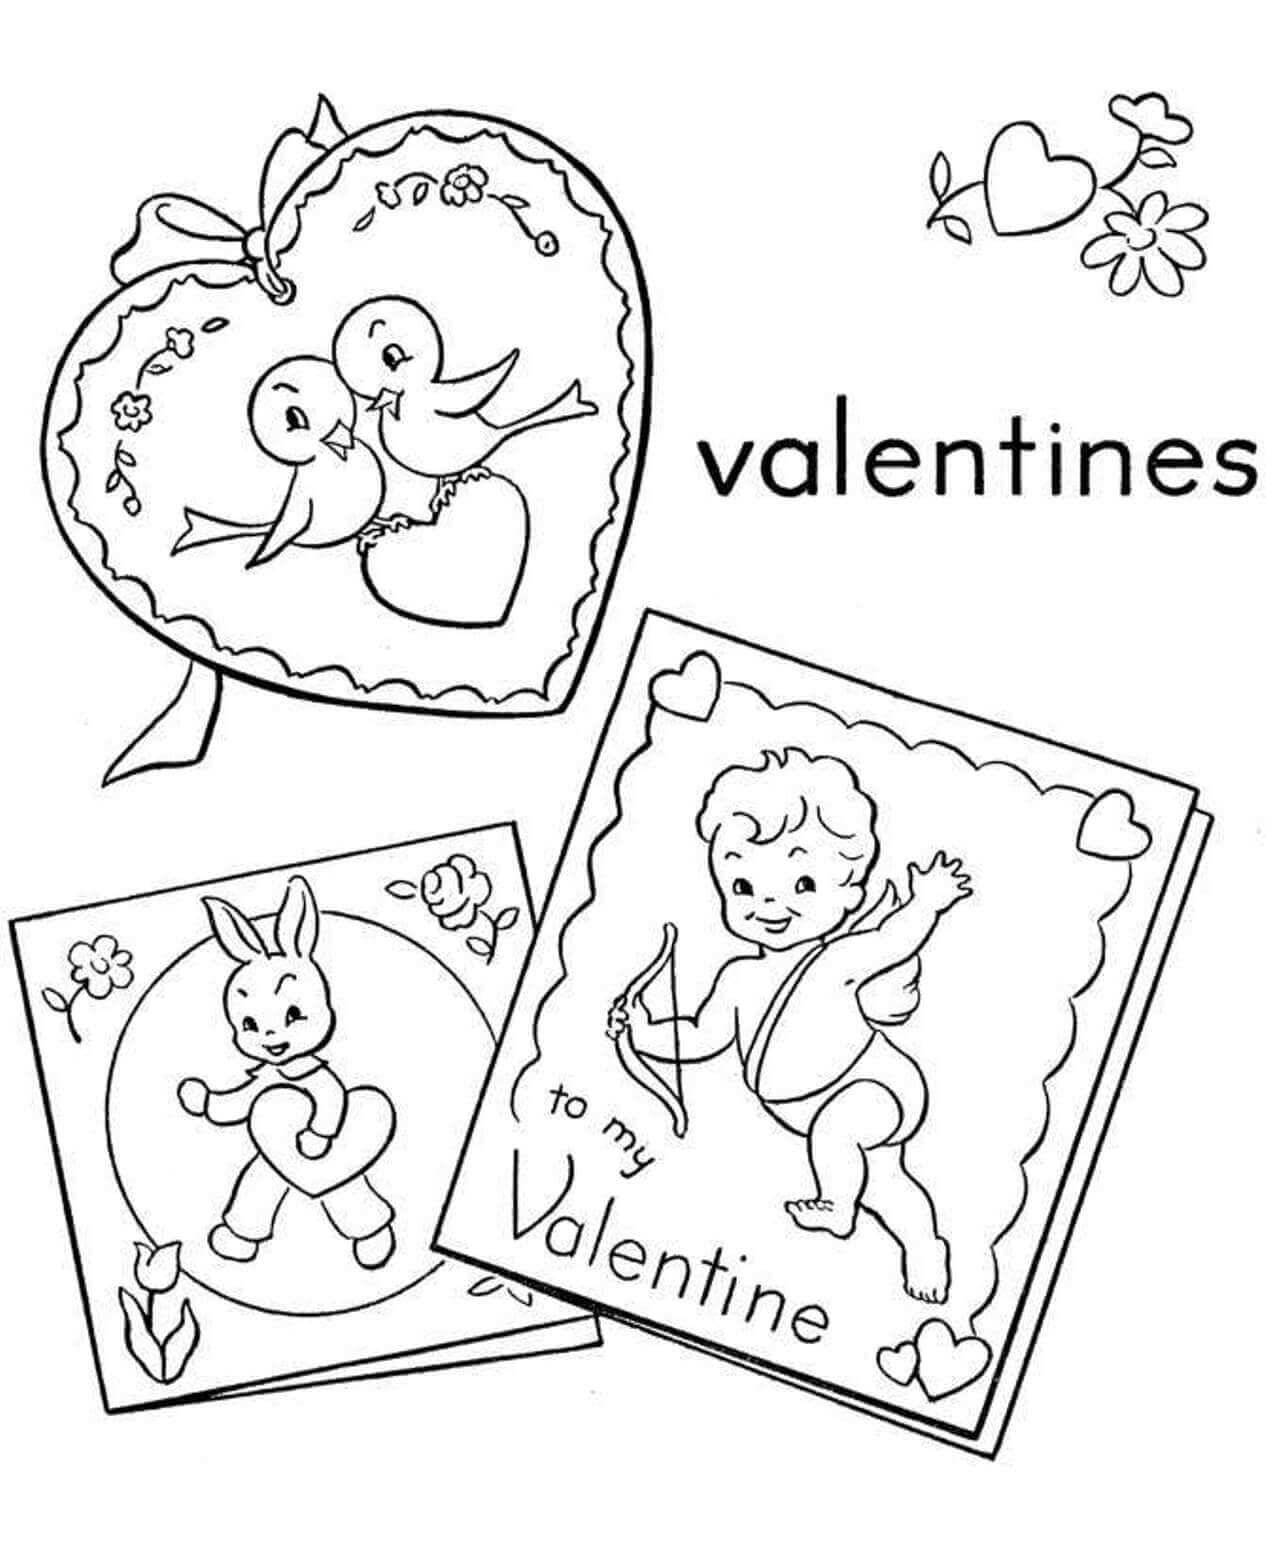 Valentines Day greeting cards coloring page